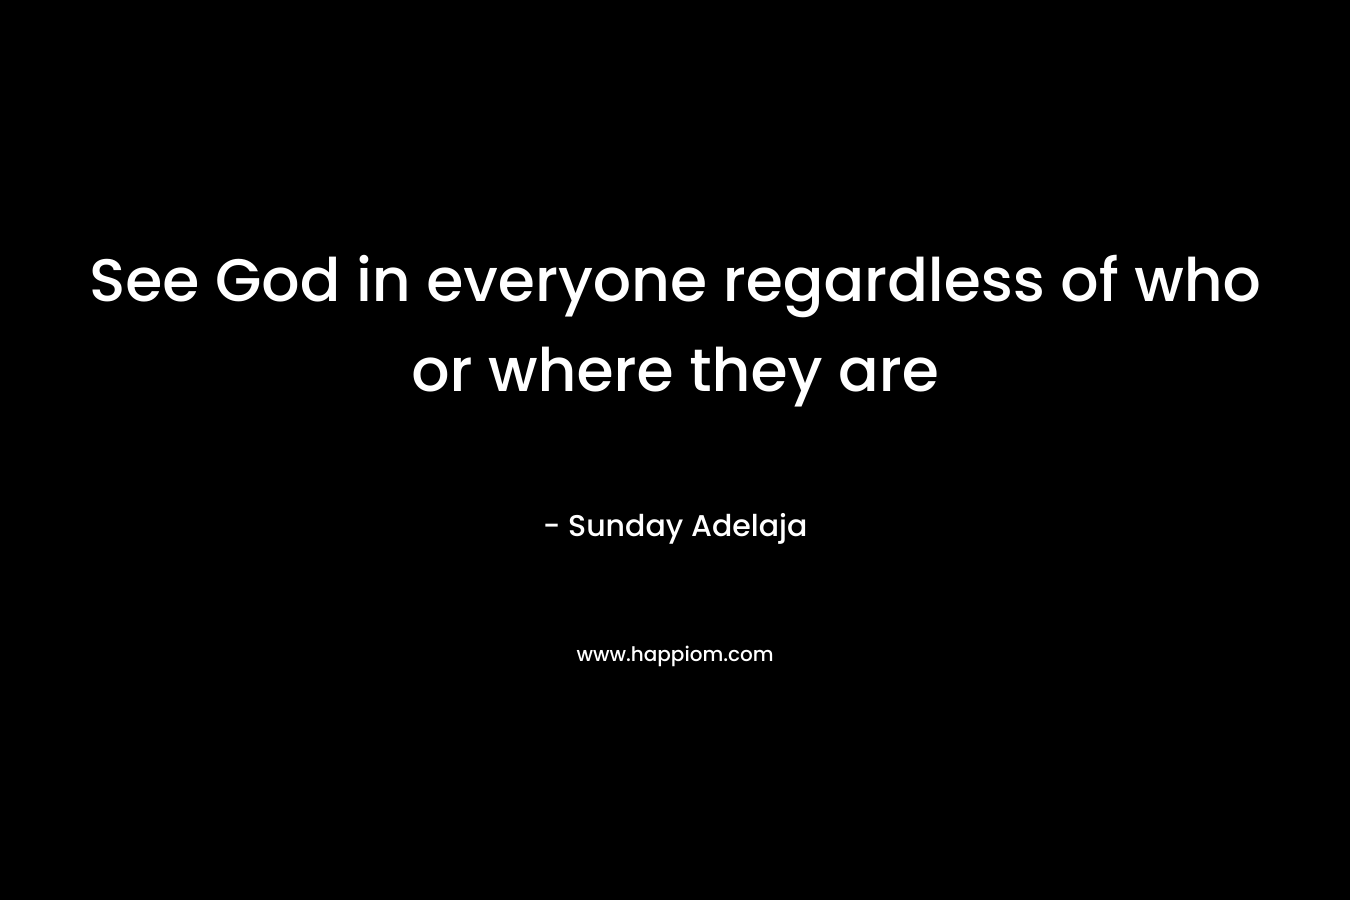 See God in everyone regardless of who or where they are